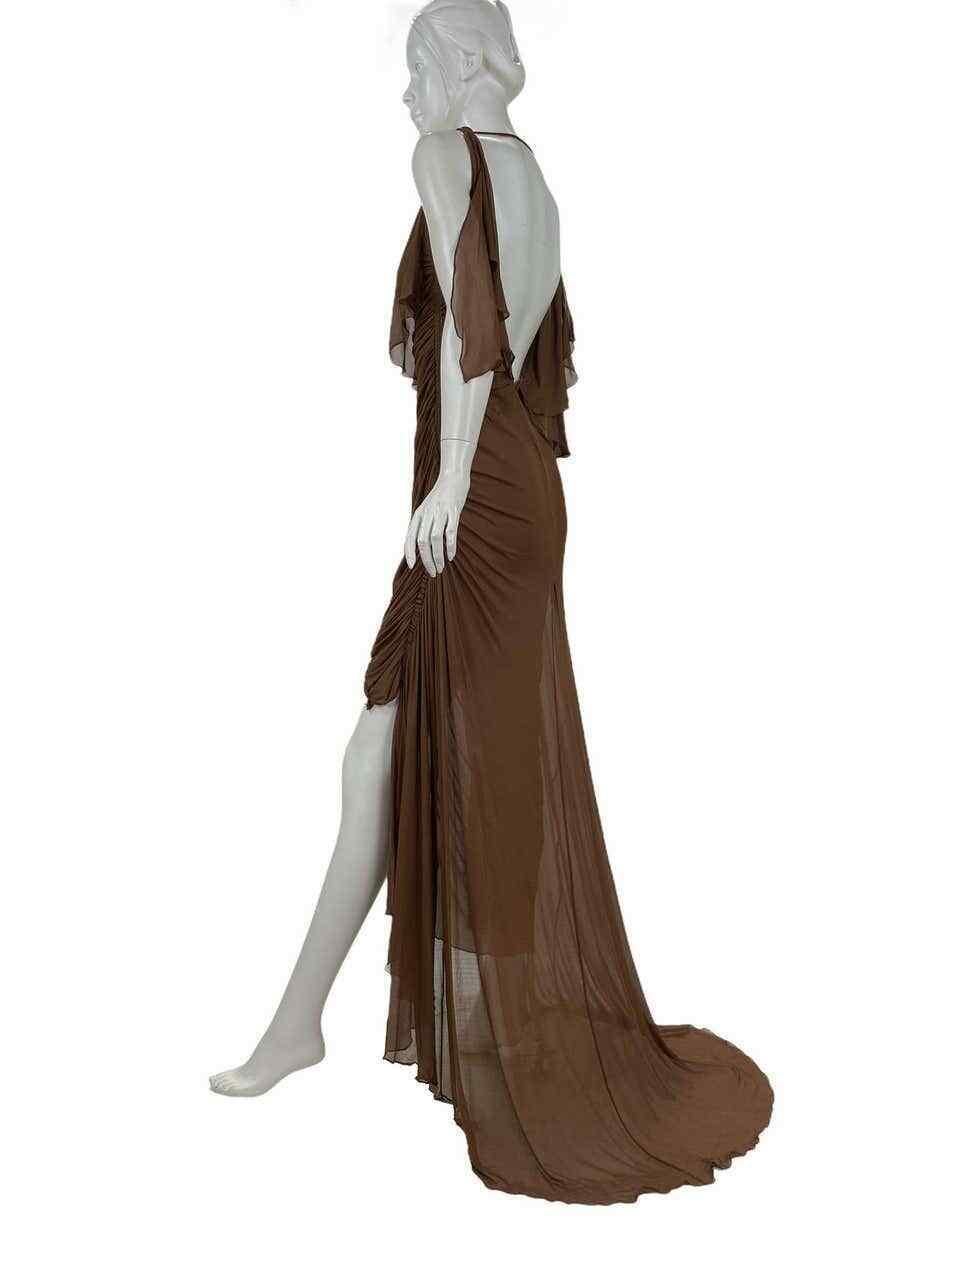 S/S 2003 Vintage Tom Ford For Gucci Greek Goddess Silk Gown as seen in Museum For Sale 1